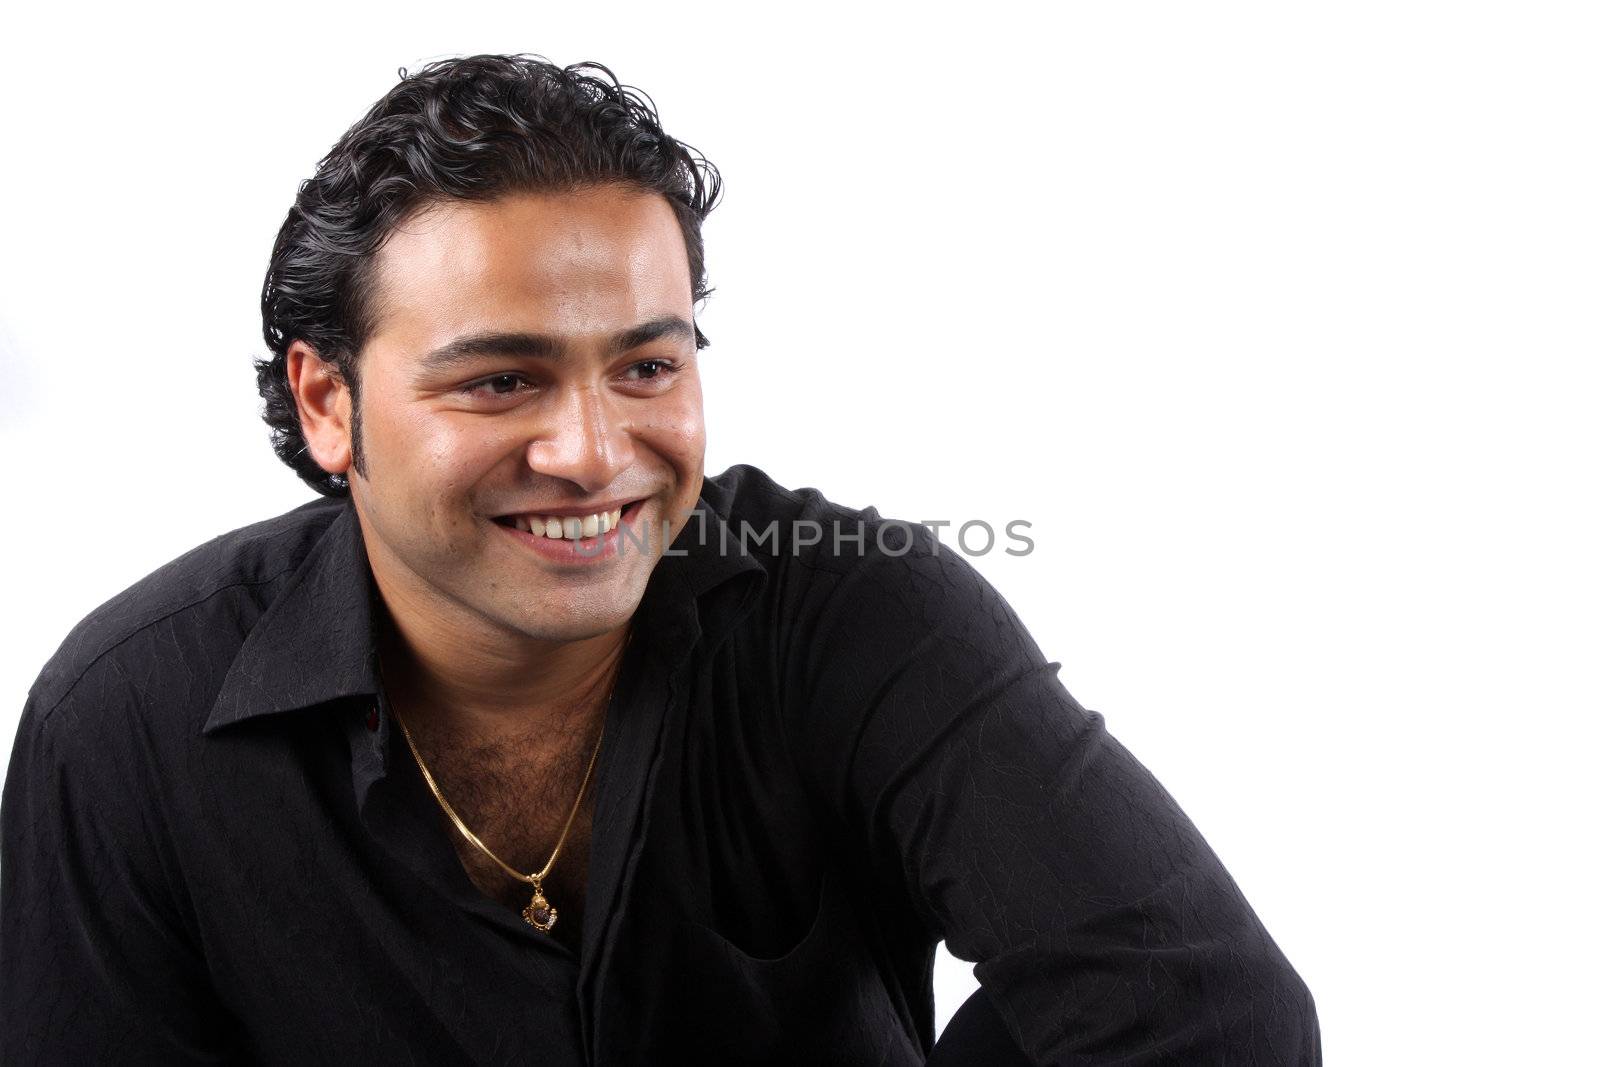 A portrait of a young Indian man wearing a black shirt and gold chain, on white studio background.